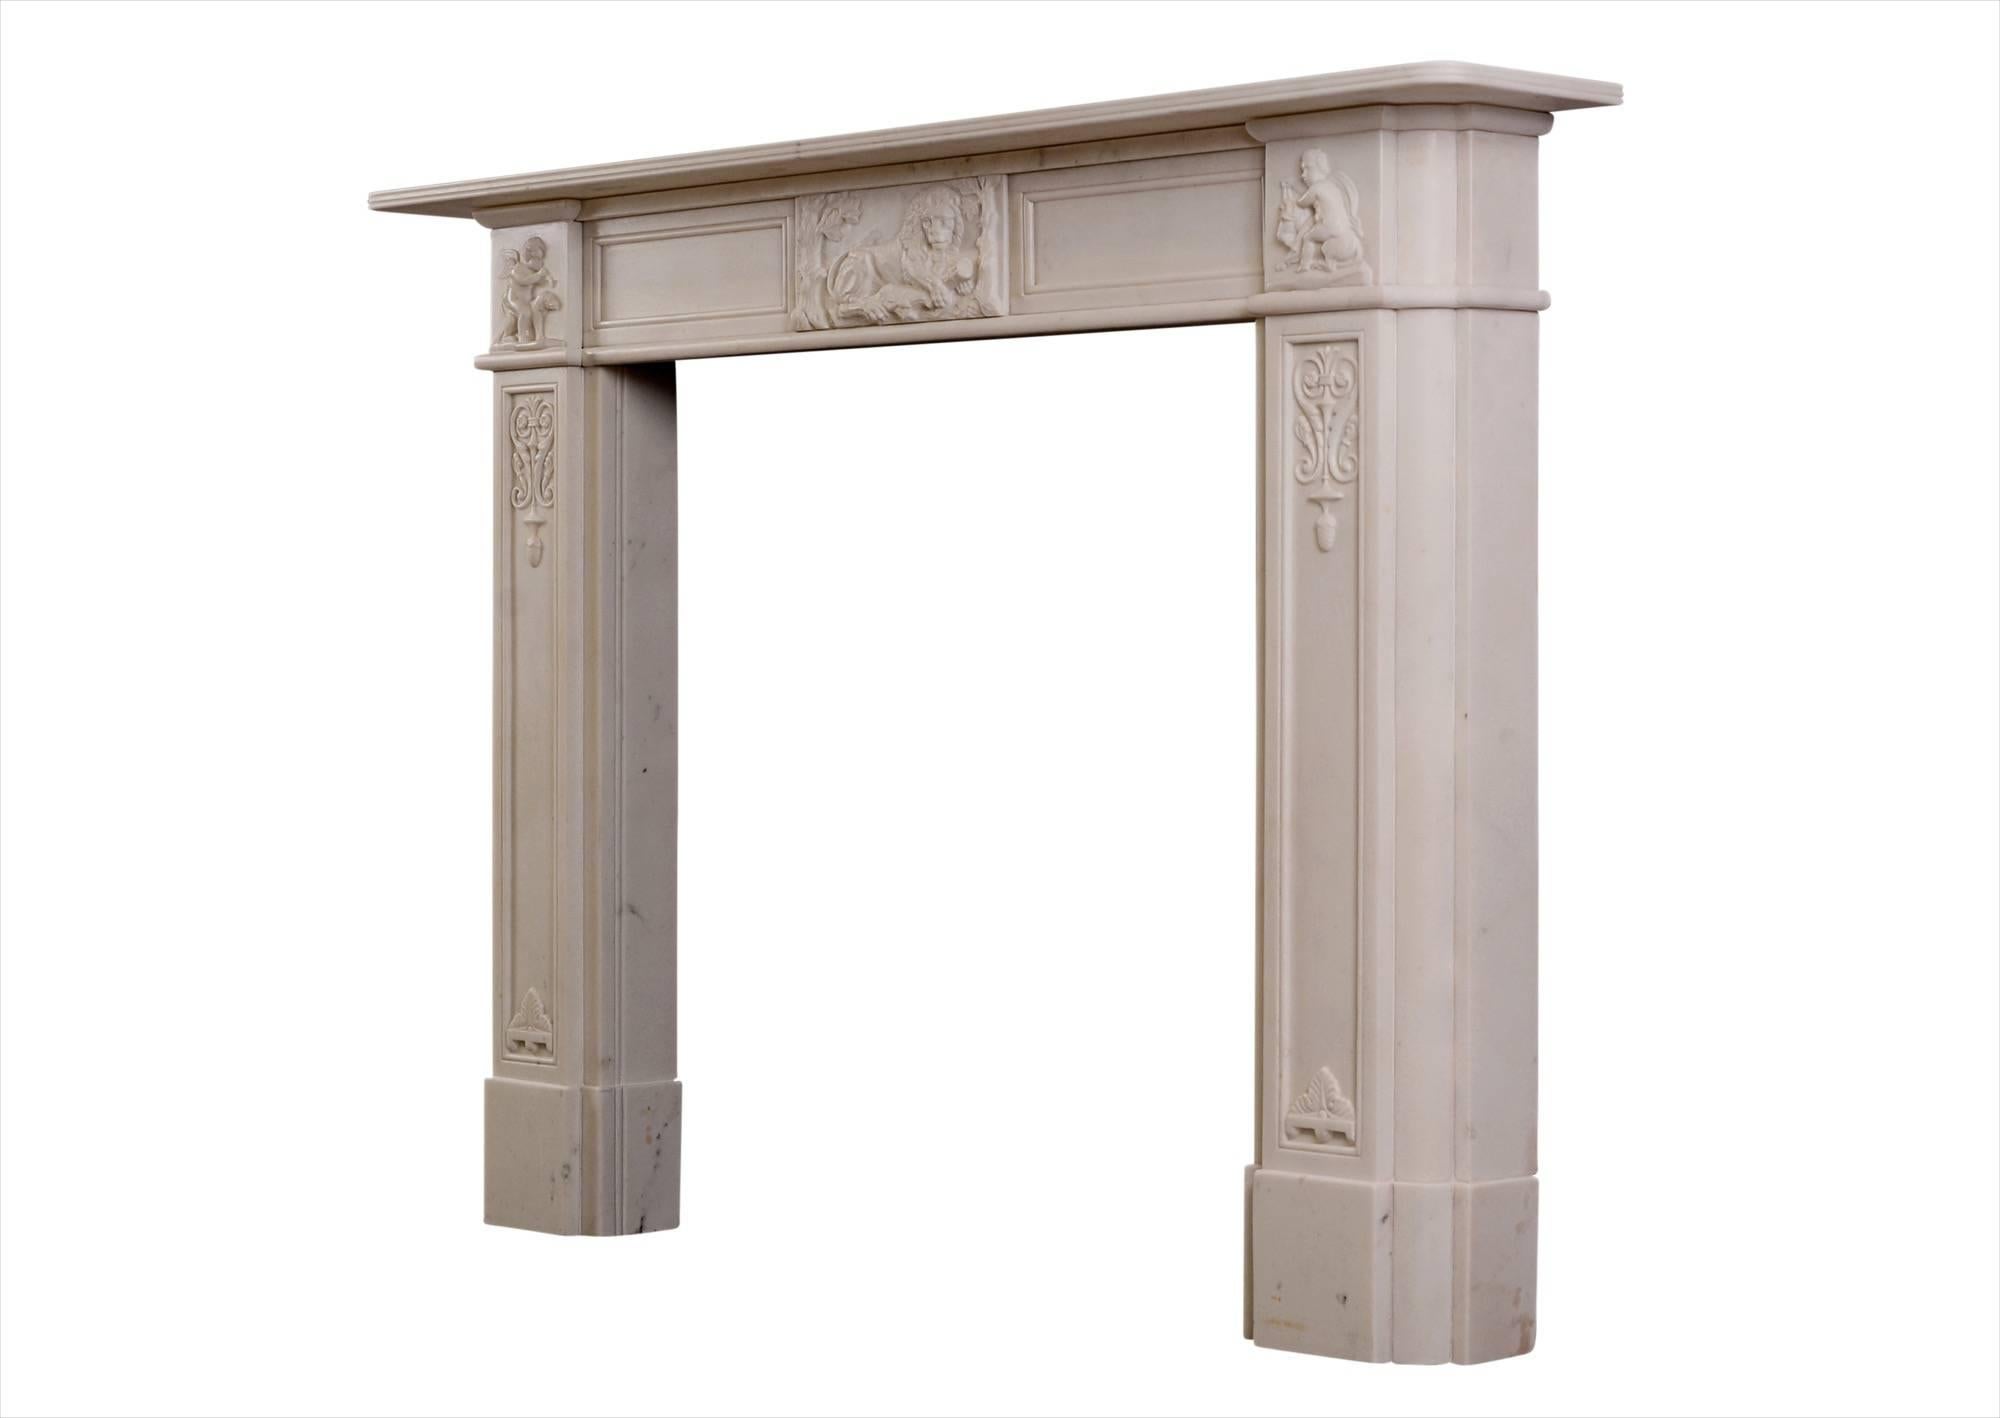 English Regency Fireplace in Statuary Marble 1